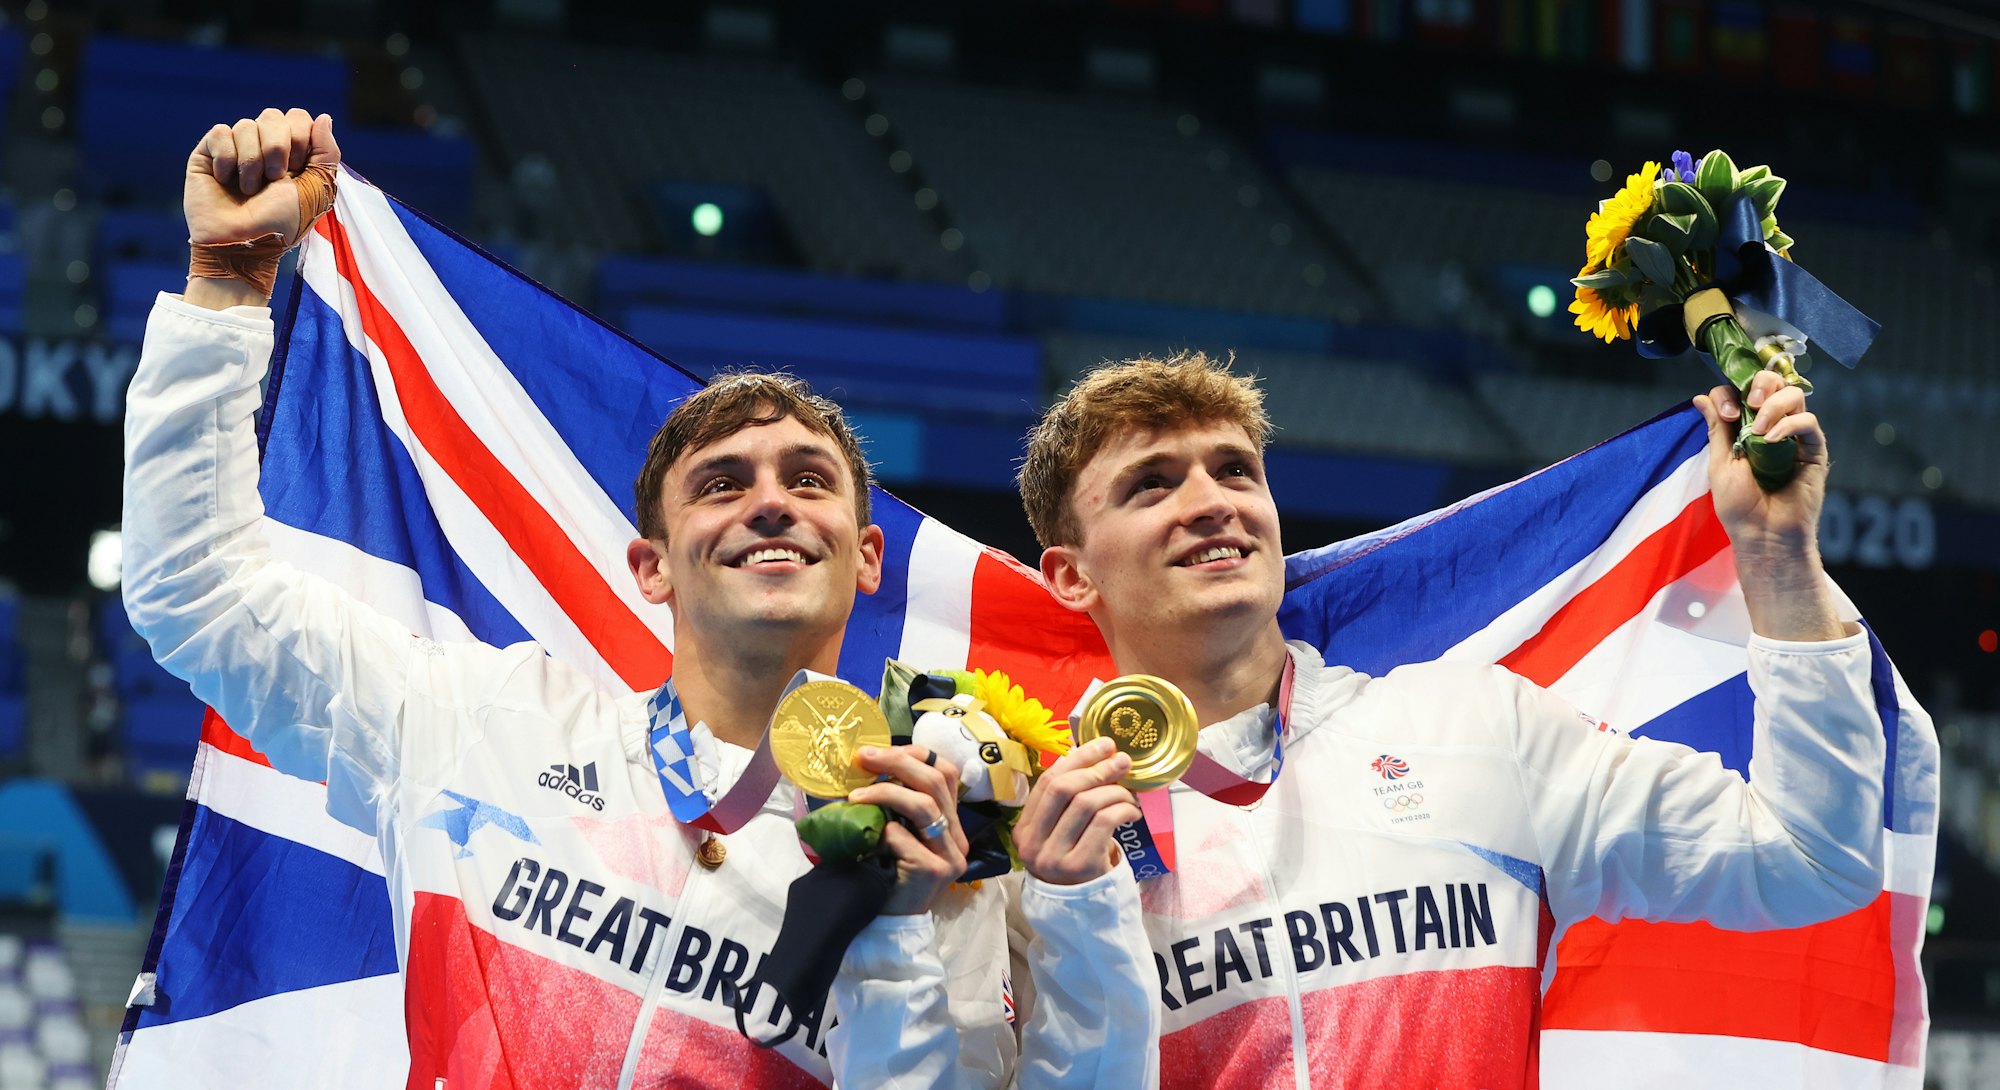 Tom Daley and Matty Lee of Team Great Britain pose for photographers with their gold medals after wi...